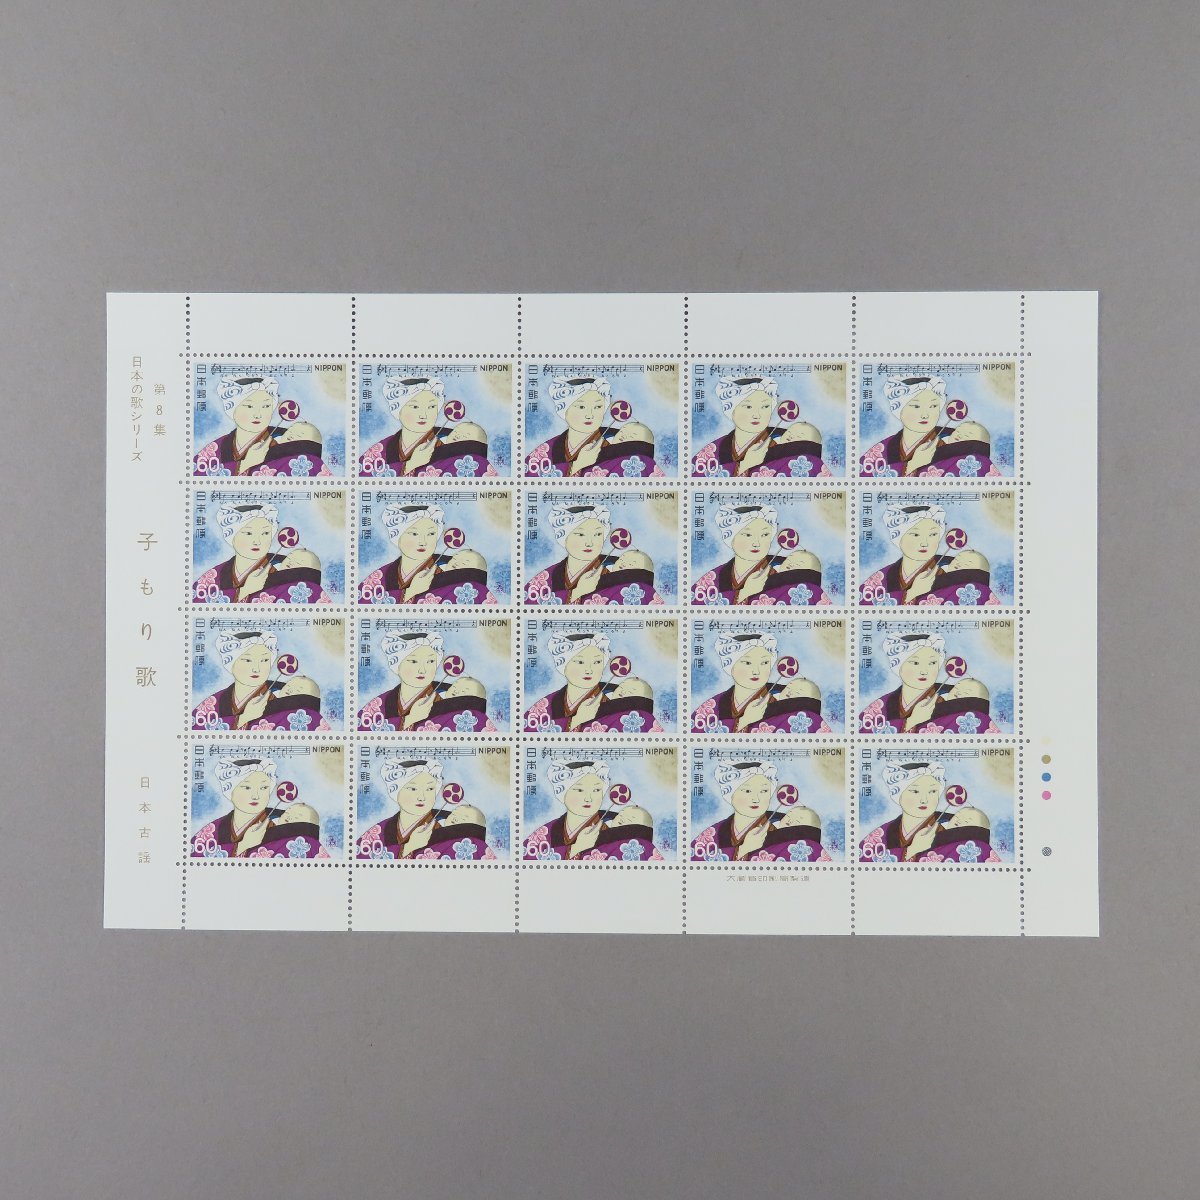 [ stamp 0839] Japanese song series no. 8 compilation ....60 jpy 20 surface 1 seat 